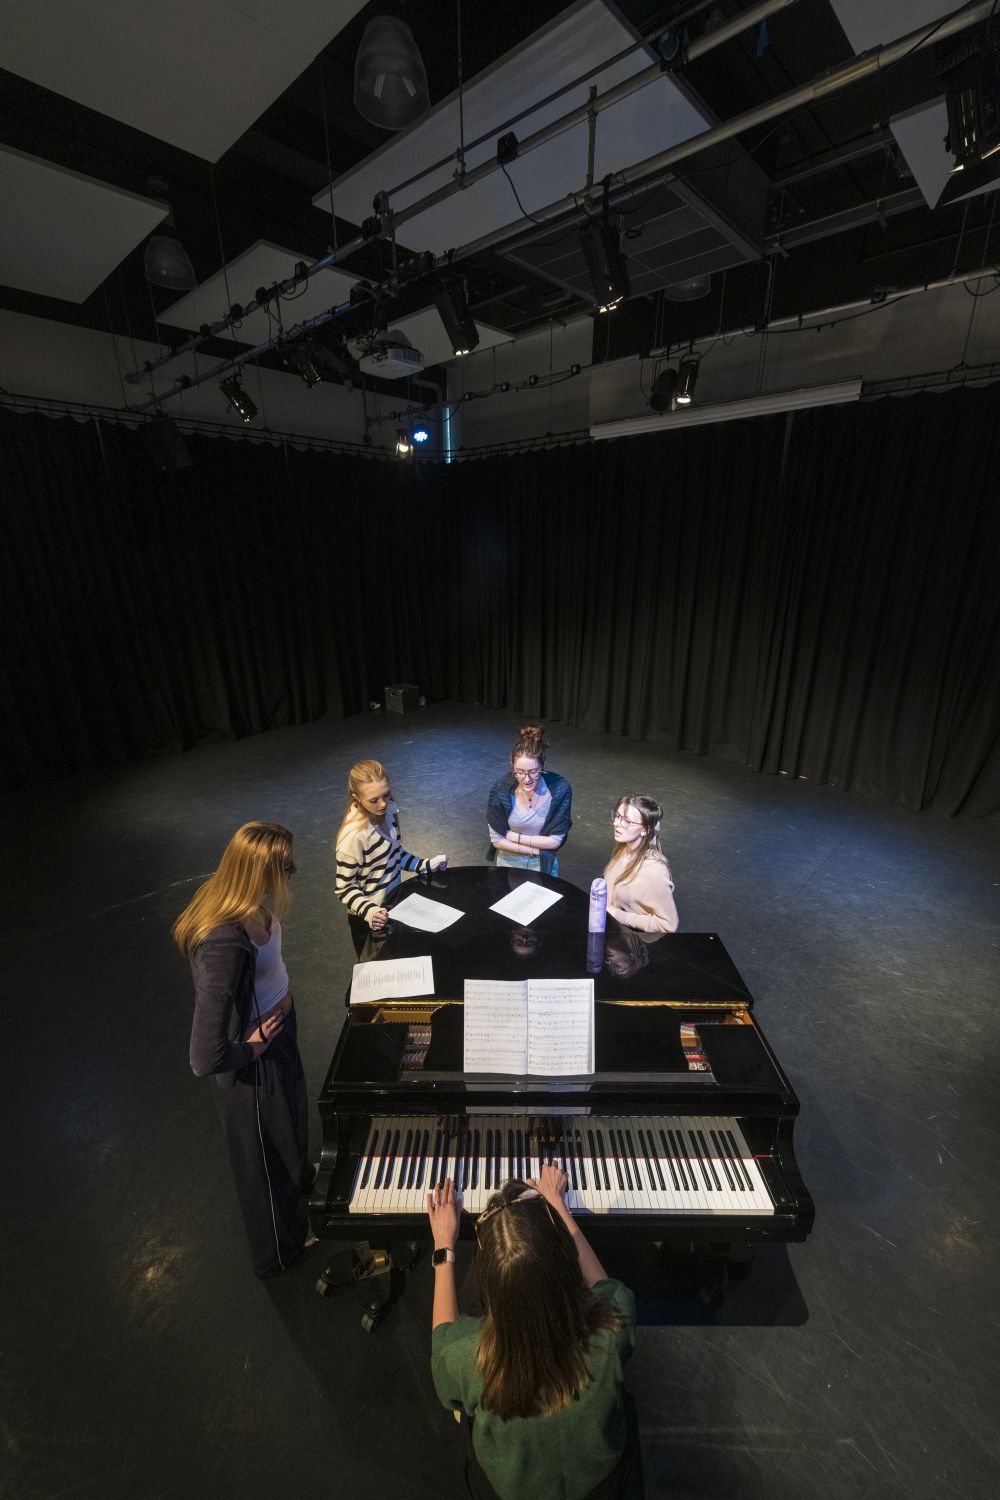 A group of female students singing gathered around a  large piano in a  black theatre